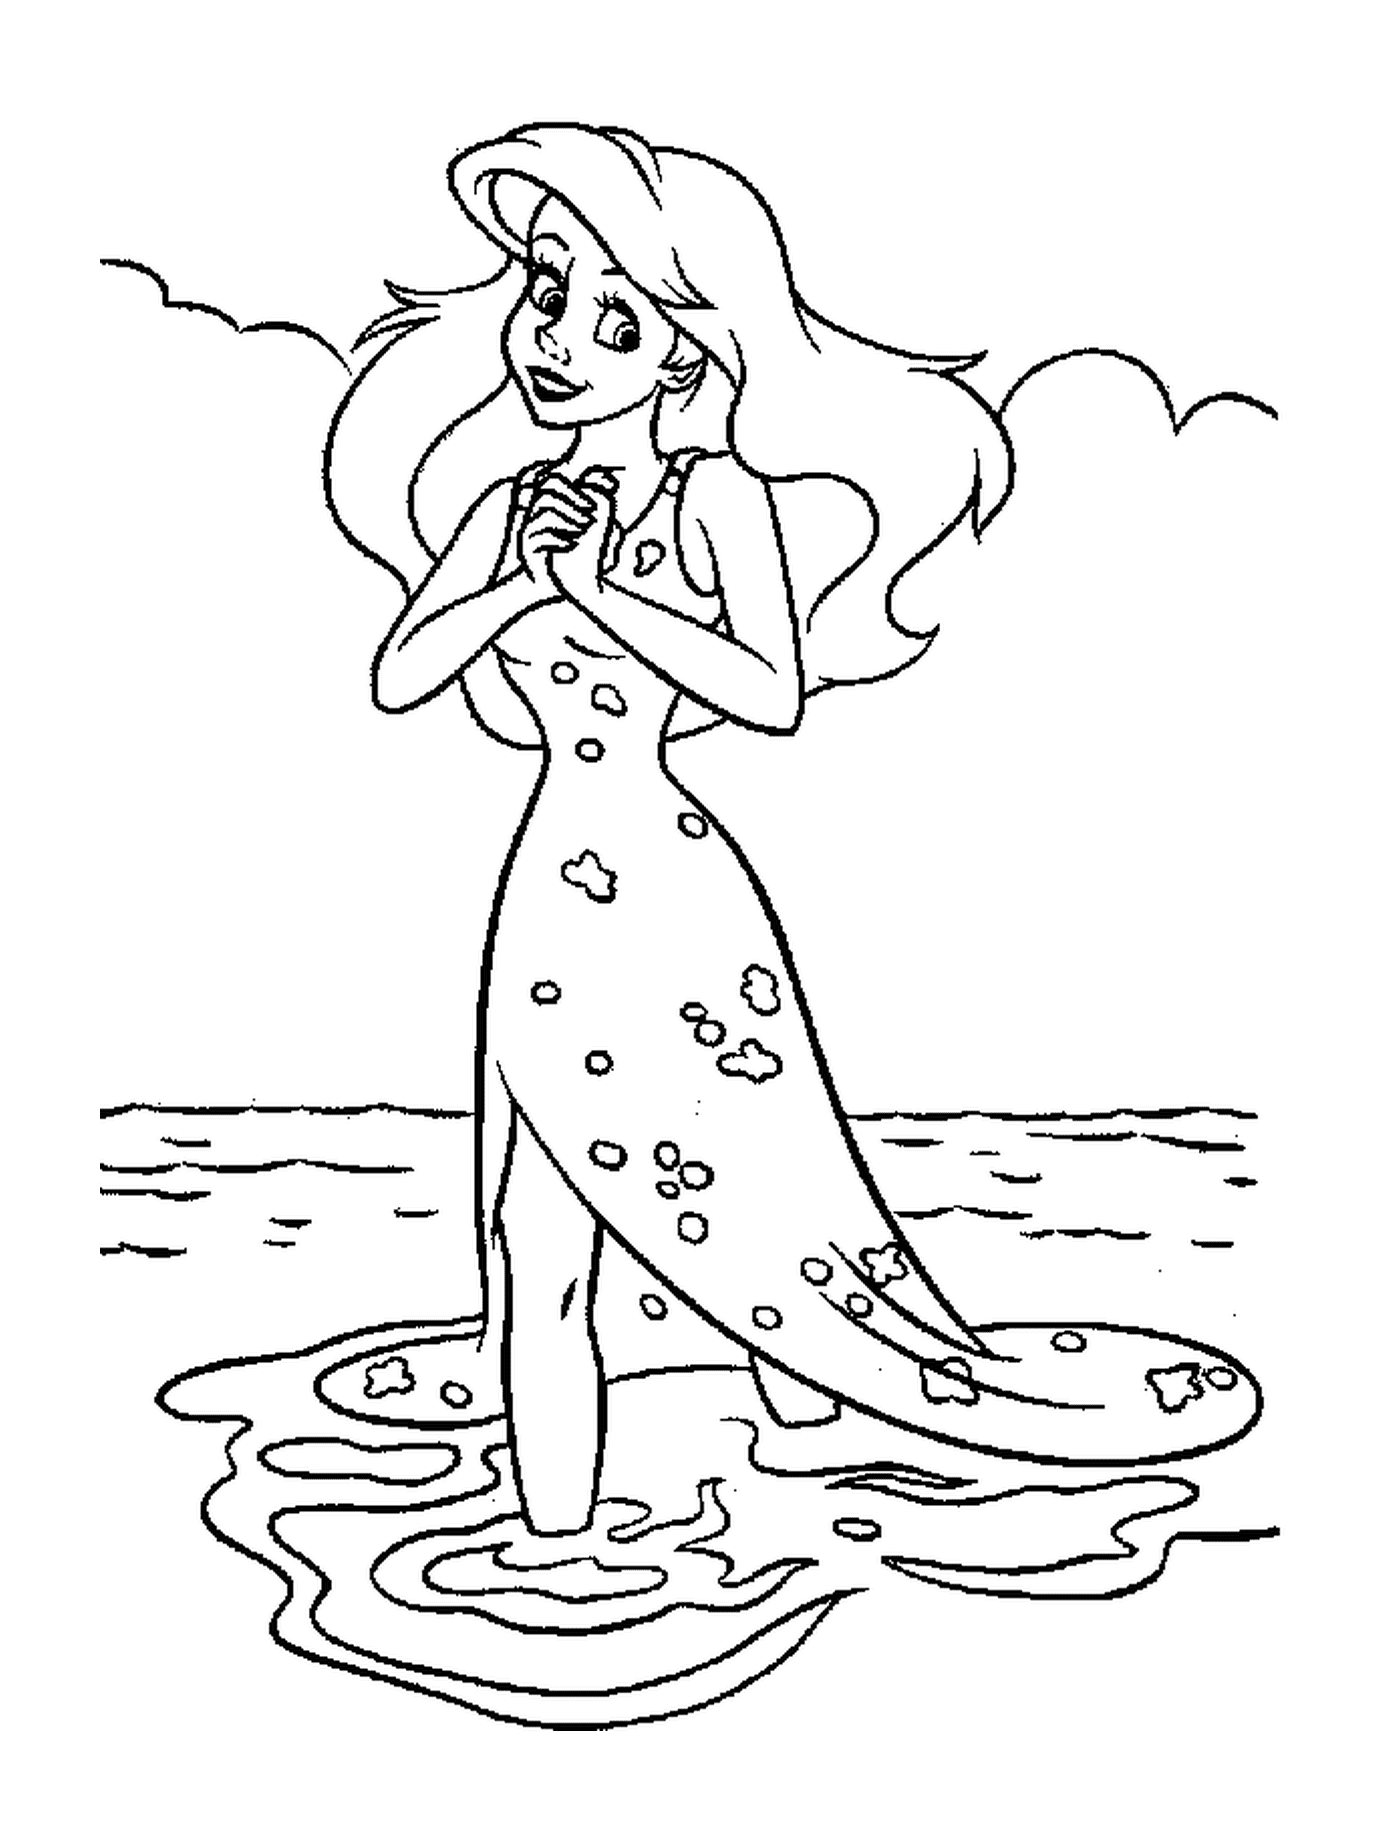  A woman standing in the water 